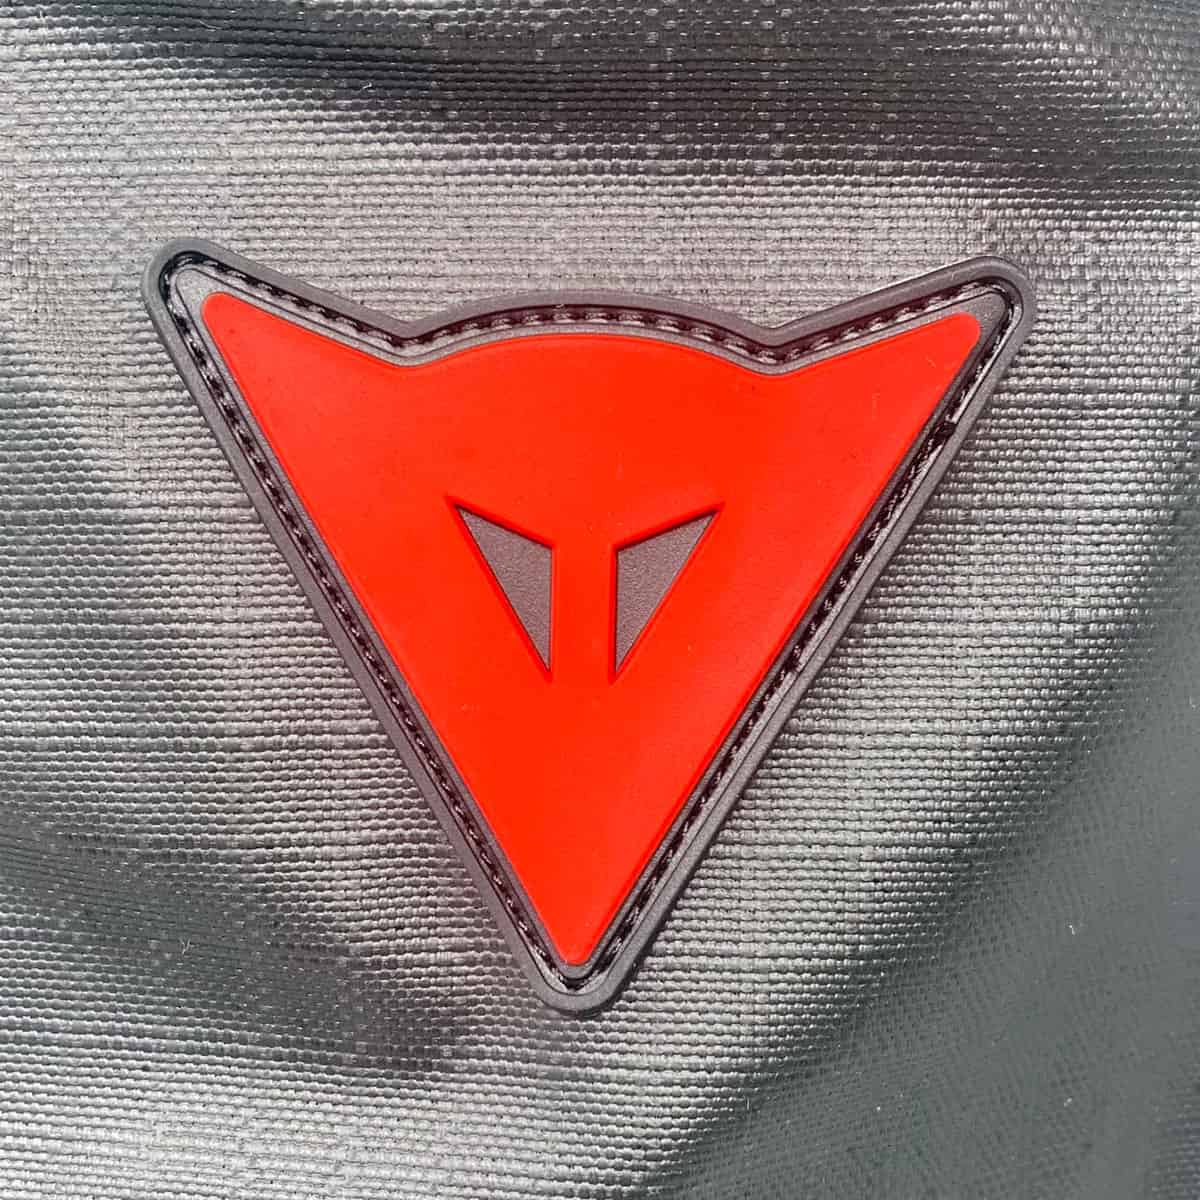 The Dainese D-Throttle Riding Backpack is a reliable and versatile choice designed for everyday use - logo